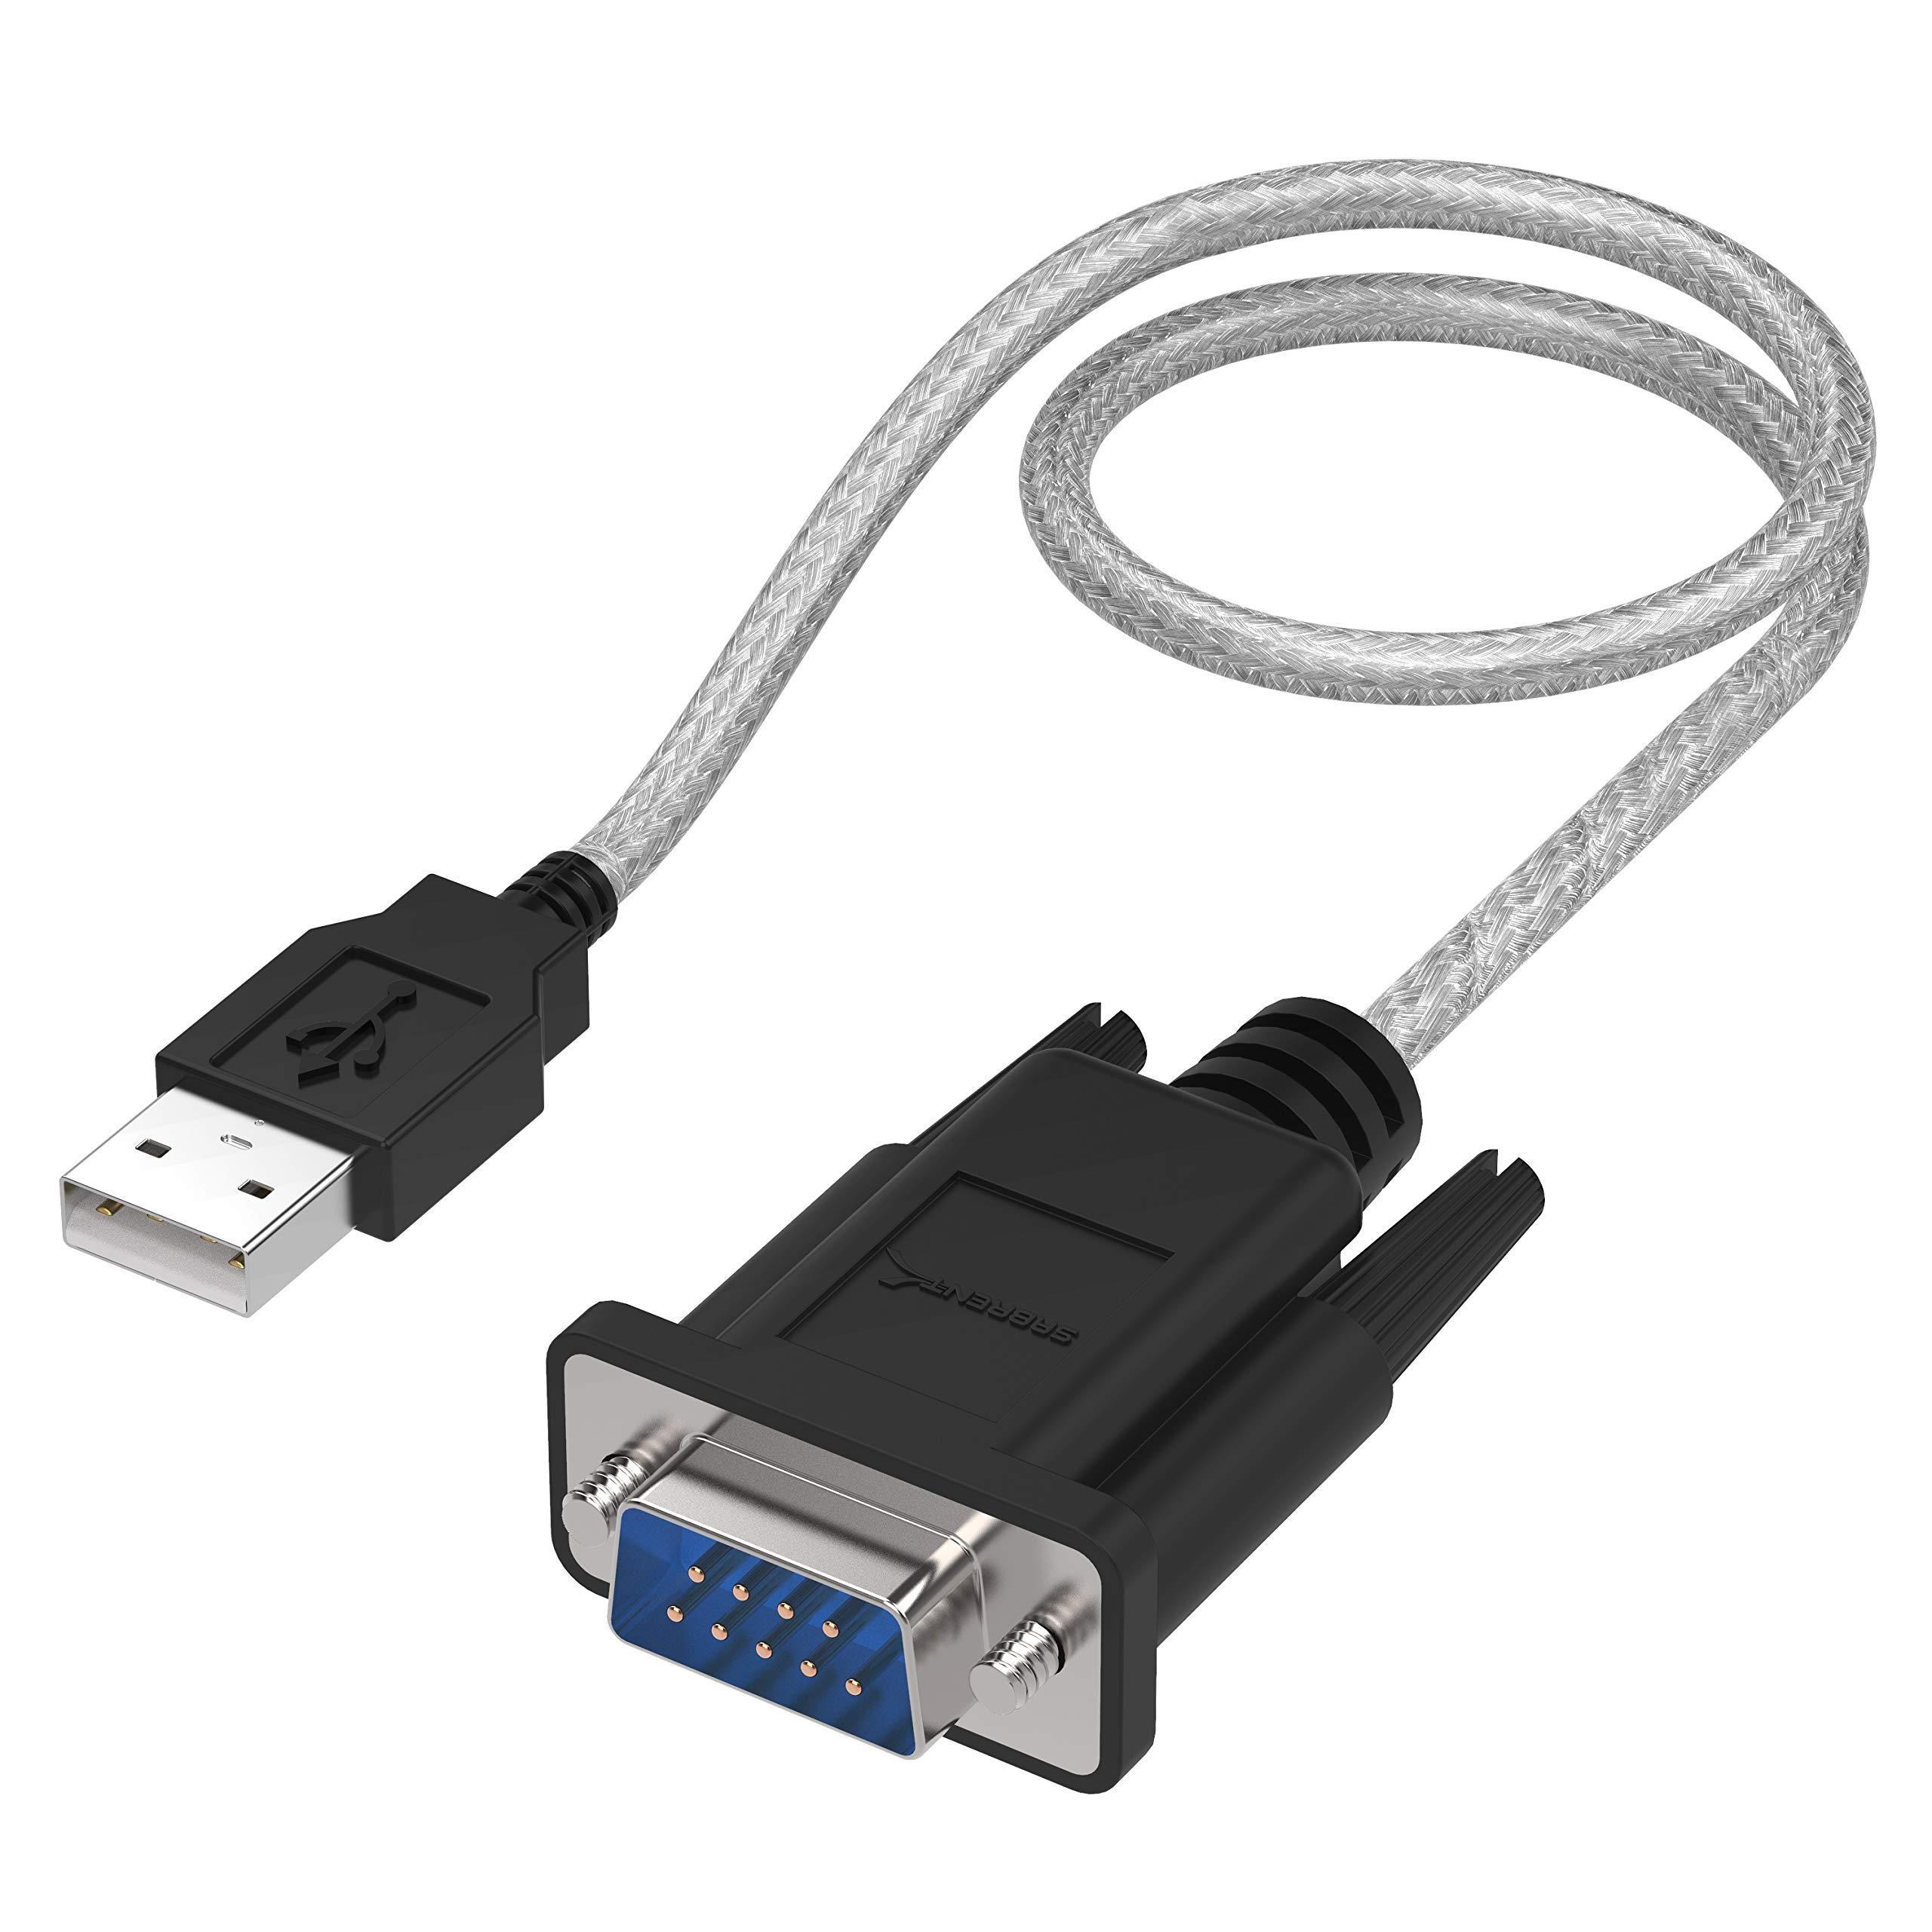 SABRENT USB to RS-232 DB9 Serial 9 pin Adapter Prolific PL2303 1-ft [SBT-USC1K]